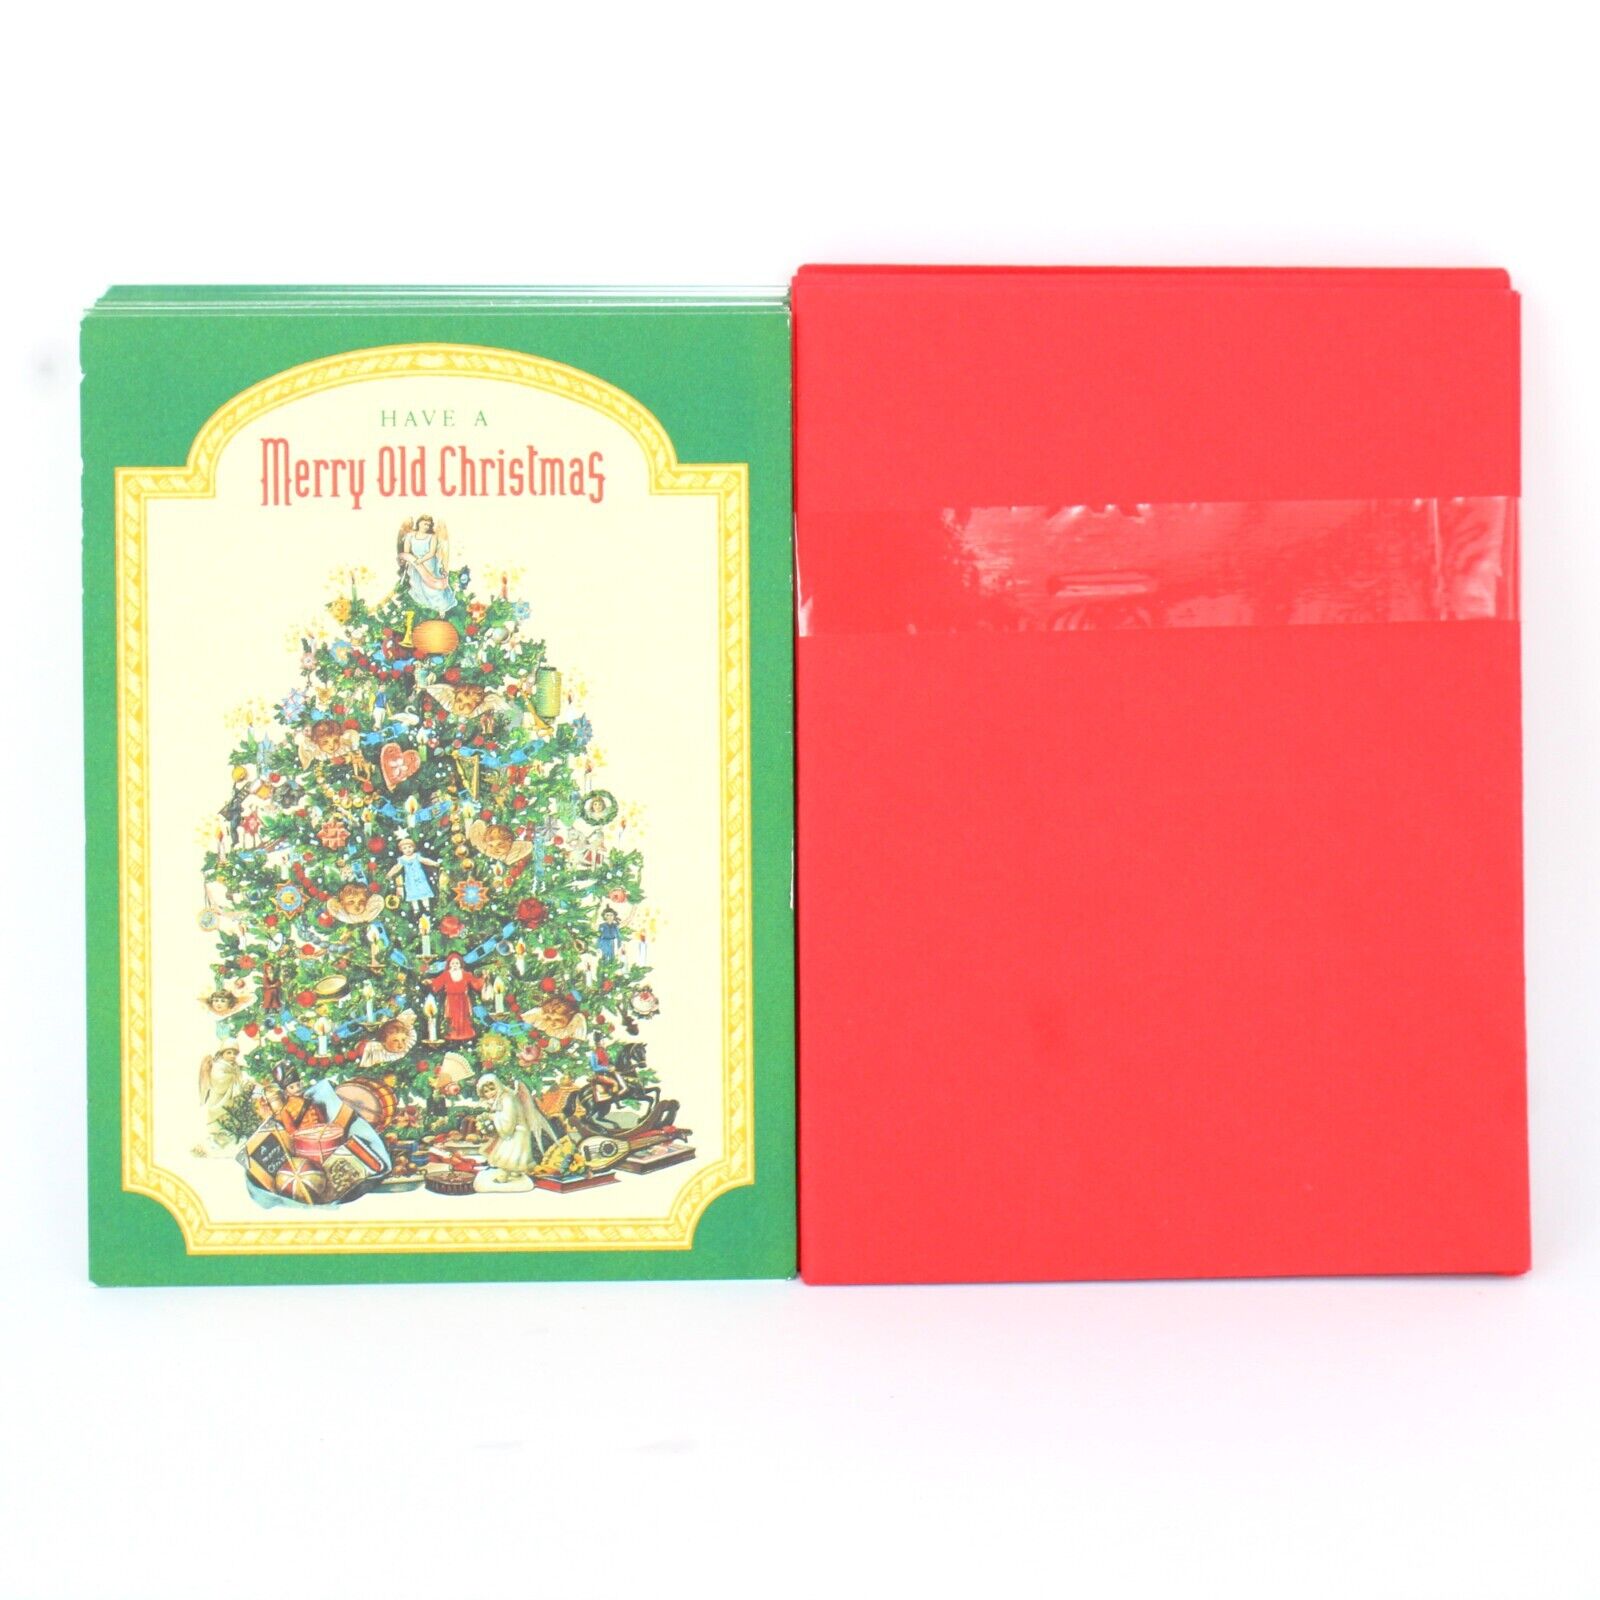 Vintage Current Christmas Cards Have a Merry Old Christmas Pack of 34 Envelope